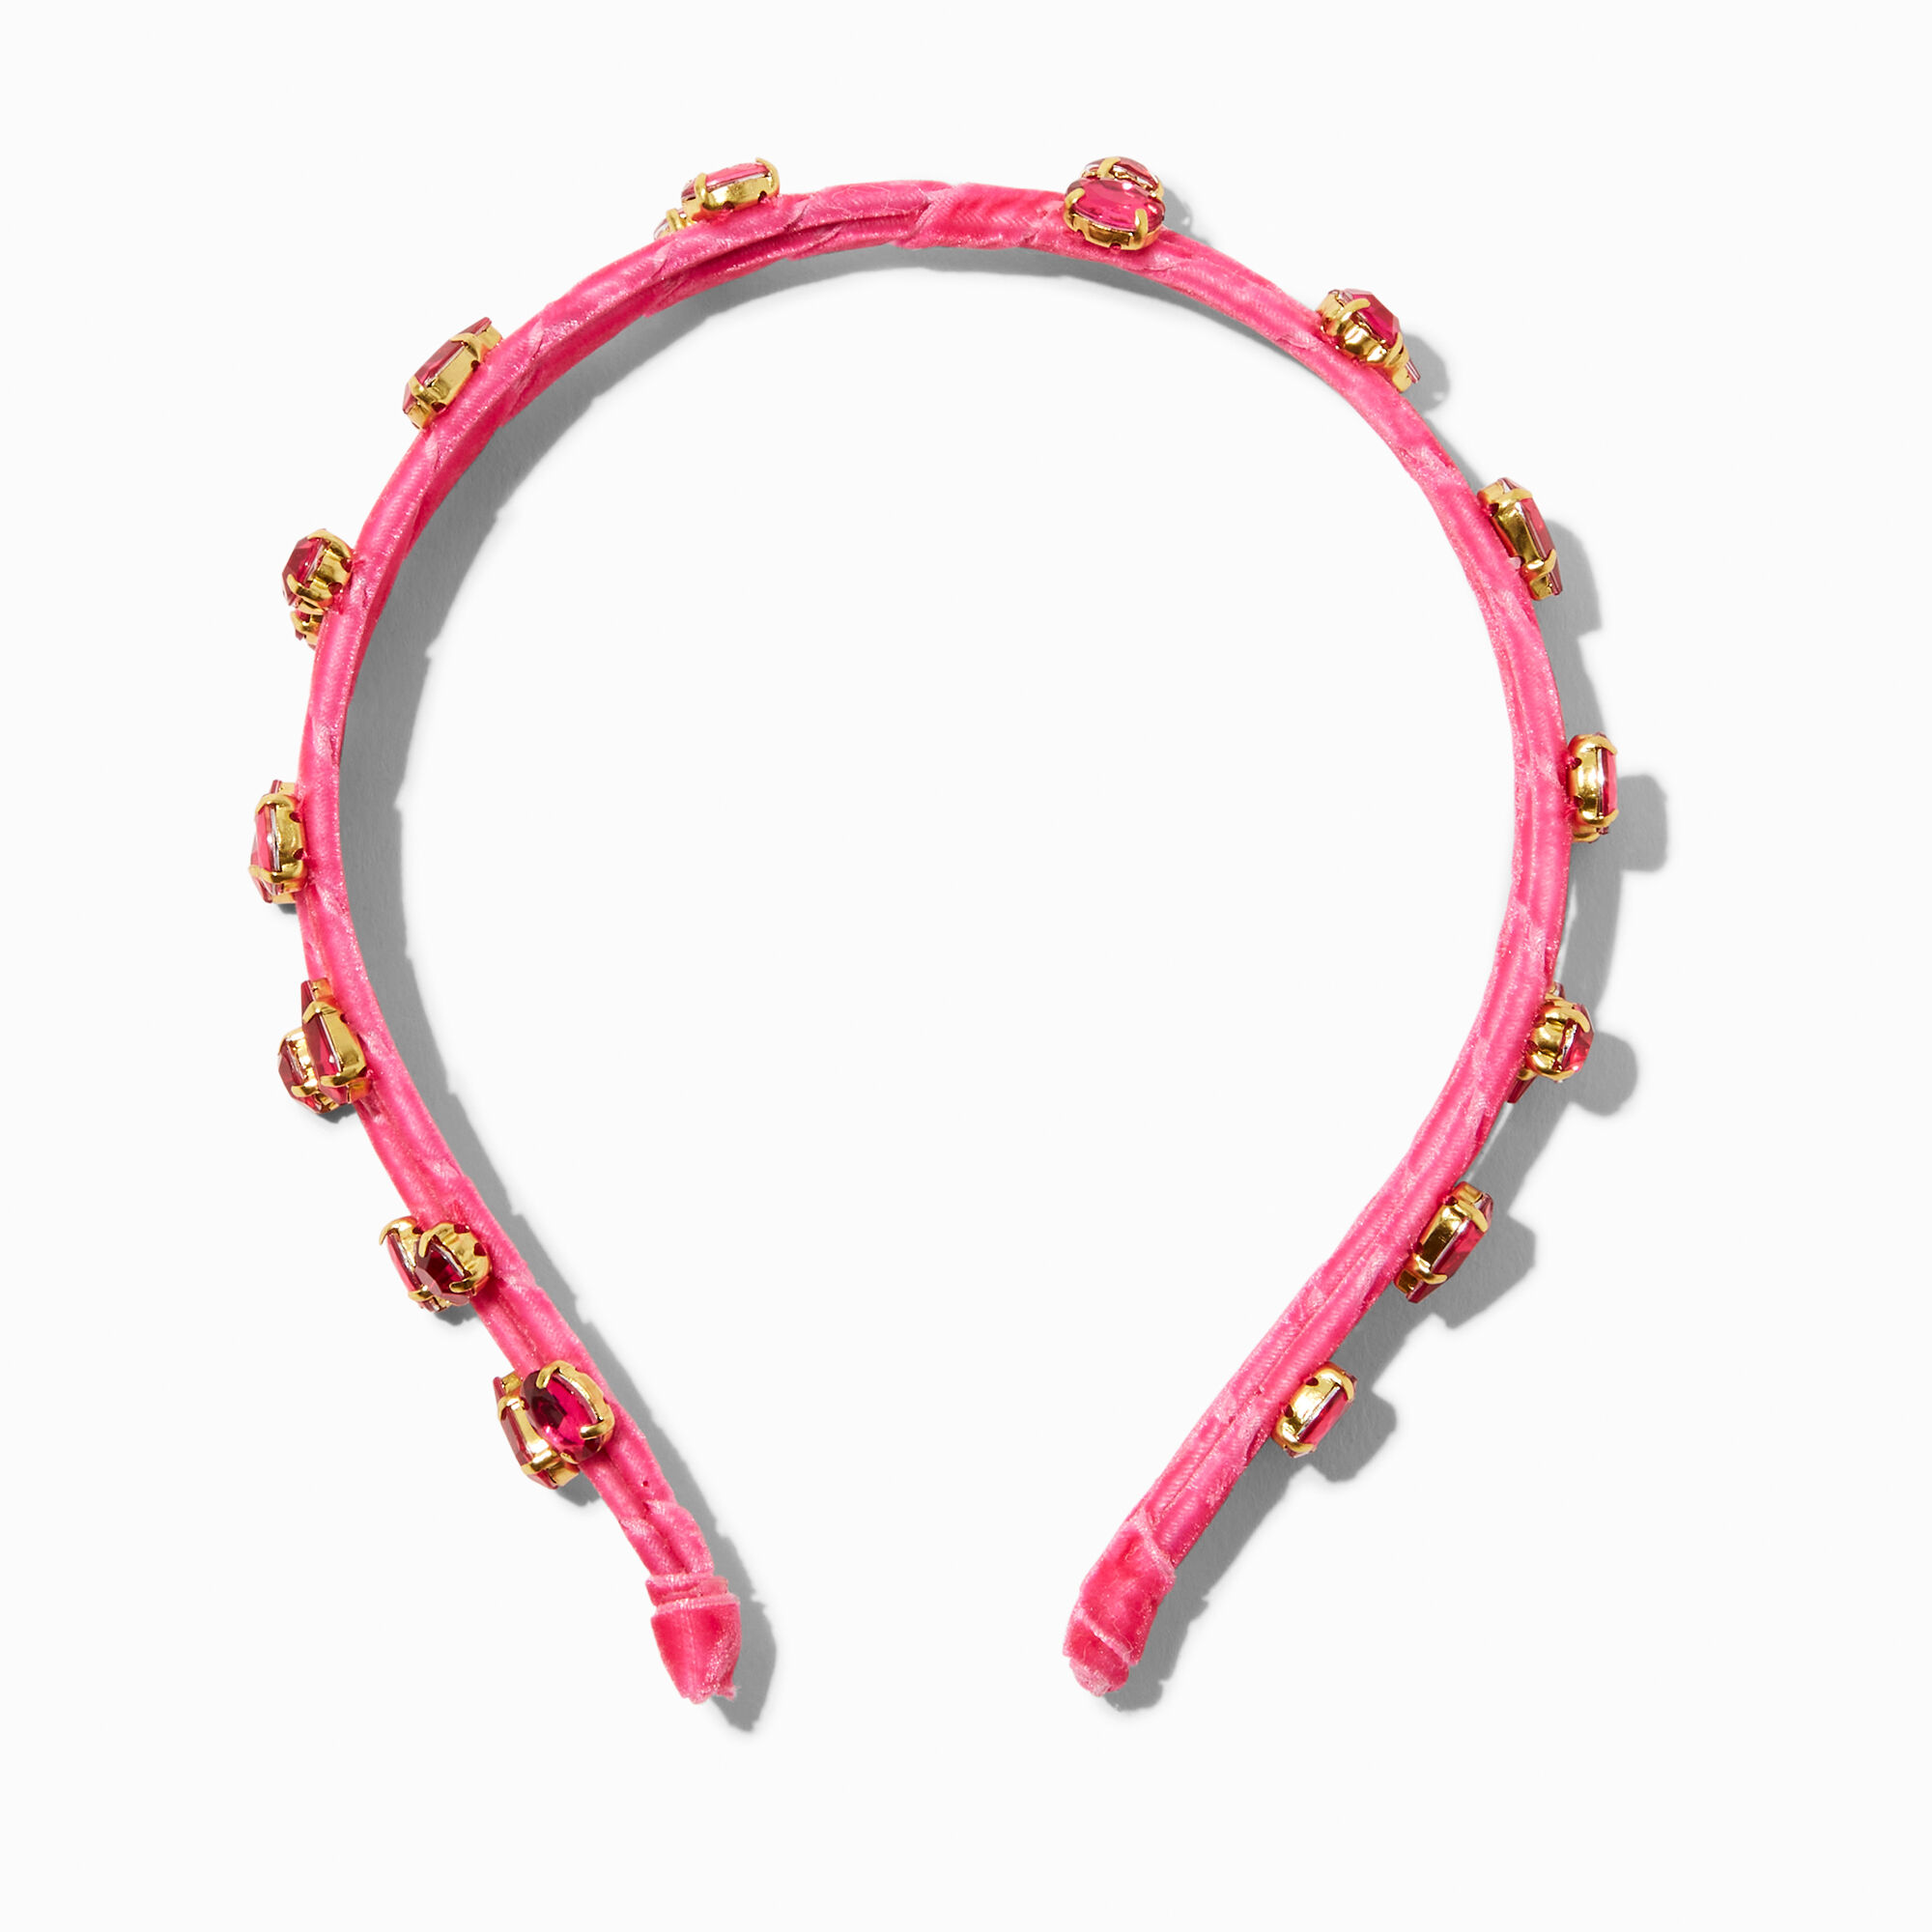 View Claires Crossed DoubleRow Gemstone Headband Pink information